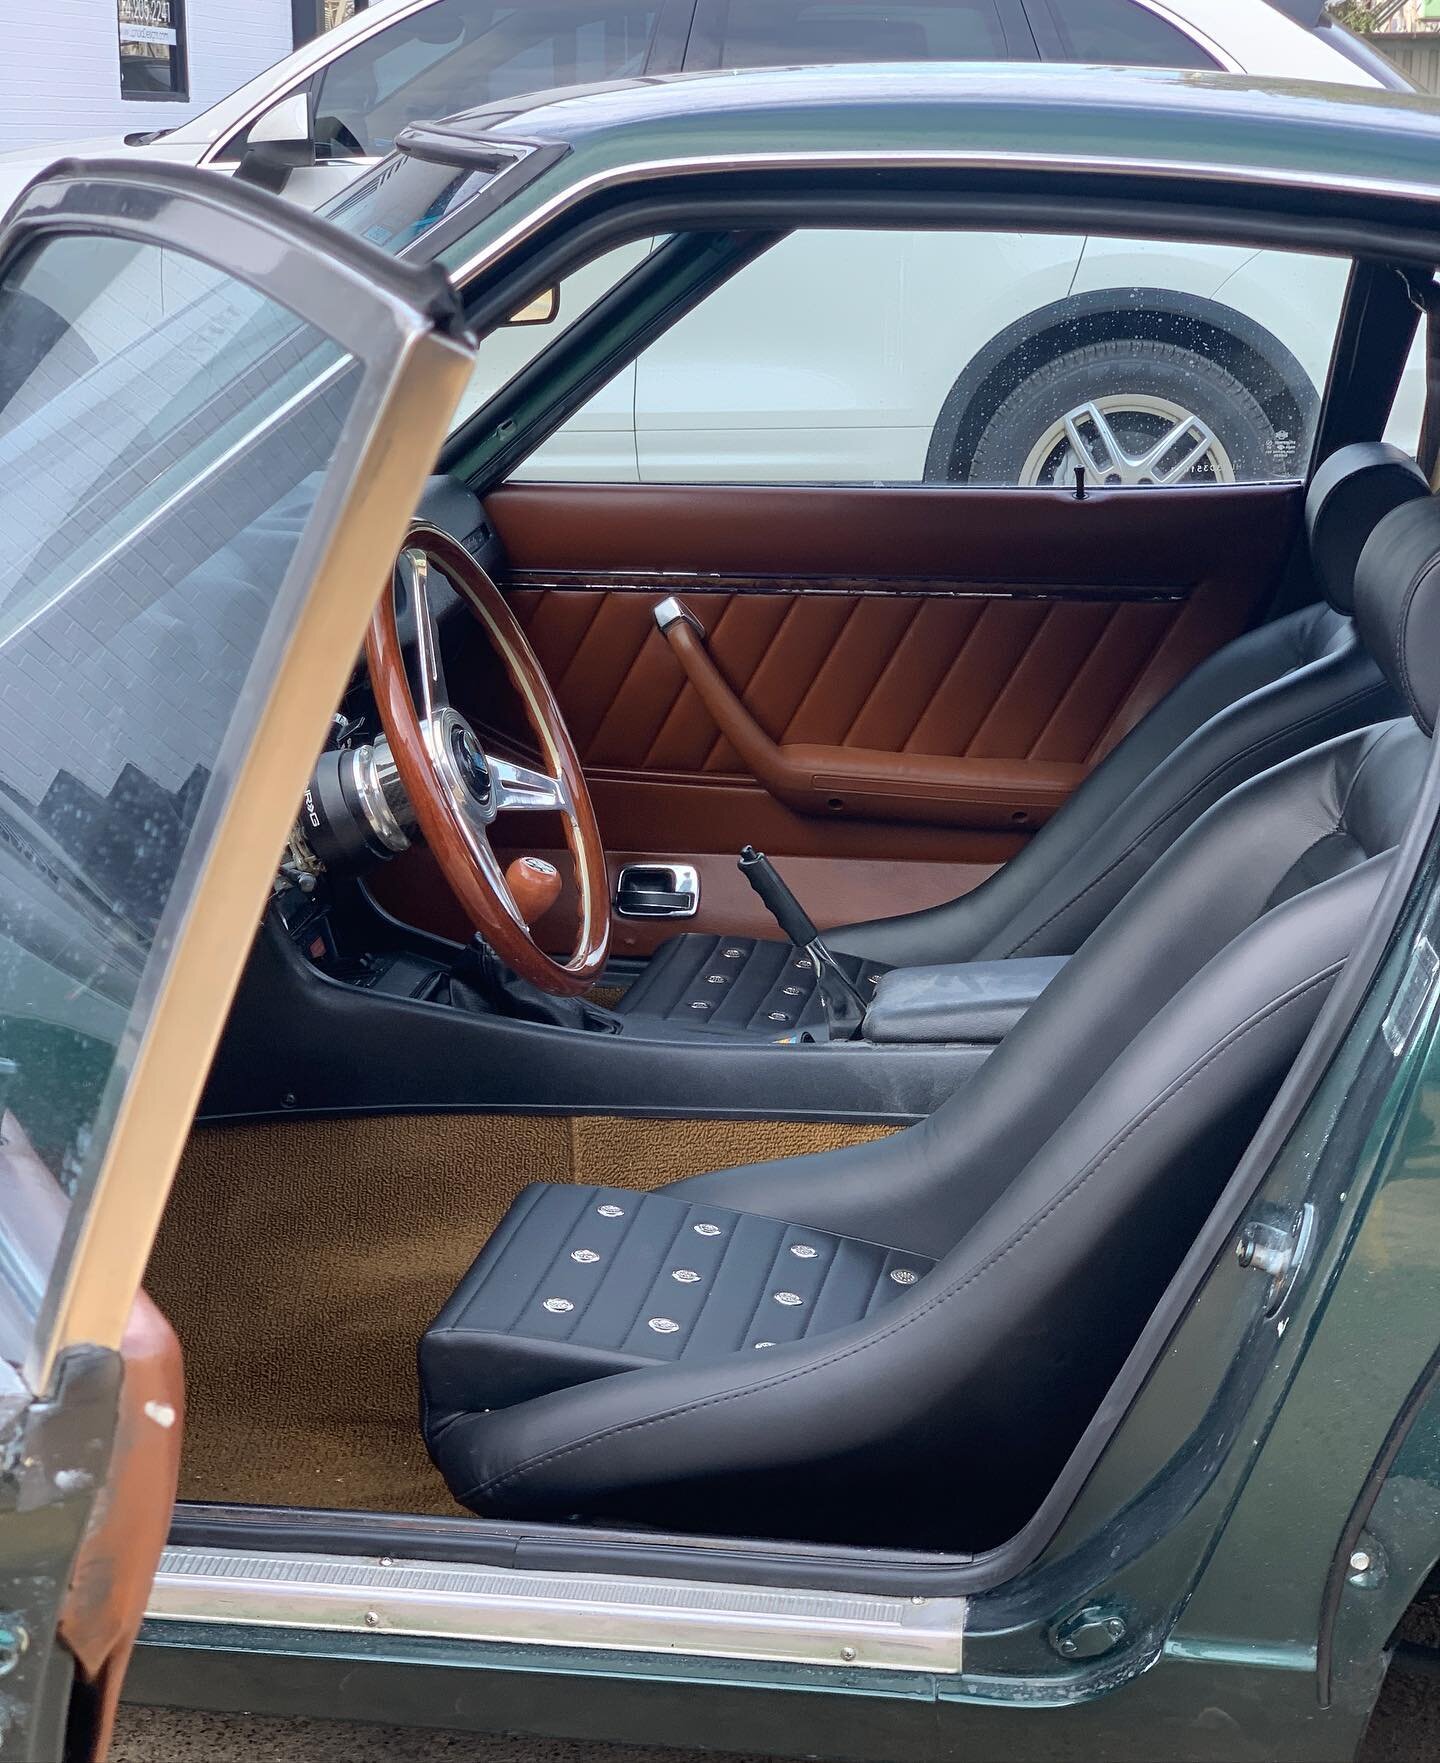 1977 Datsun 280z Retrofitted Seats And carpet repair! If you know how to COUNT, know you can Always COUNT on us!
#upholddesigns #upholder